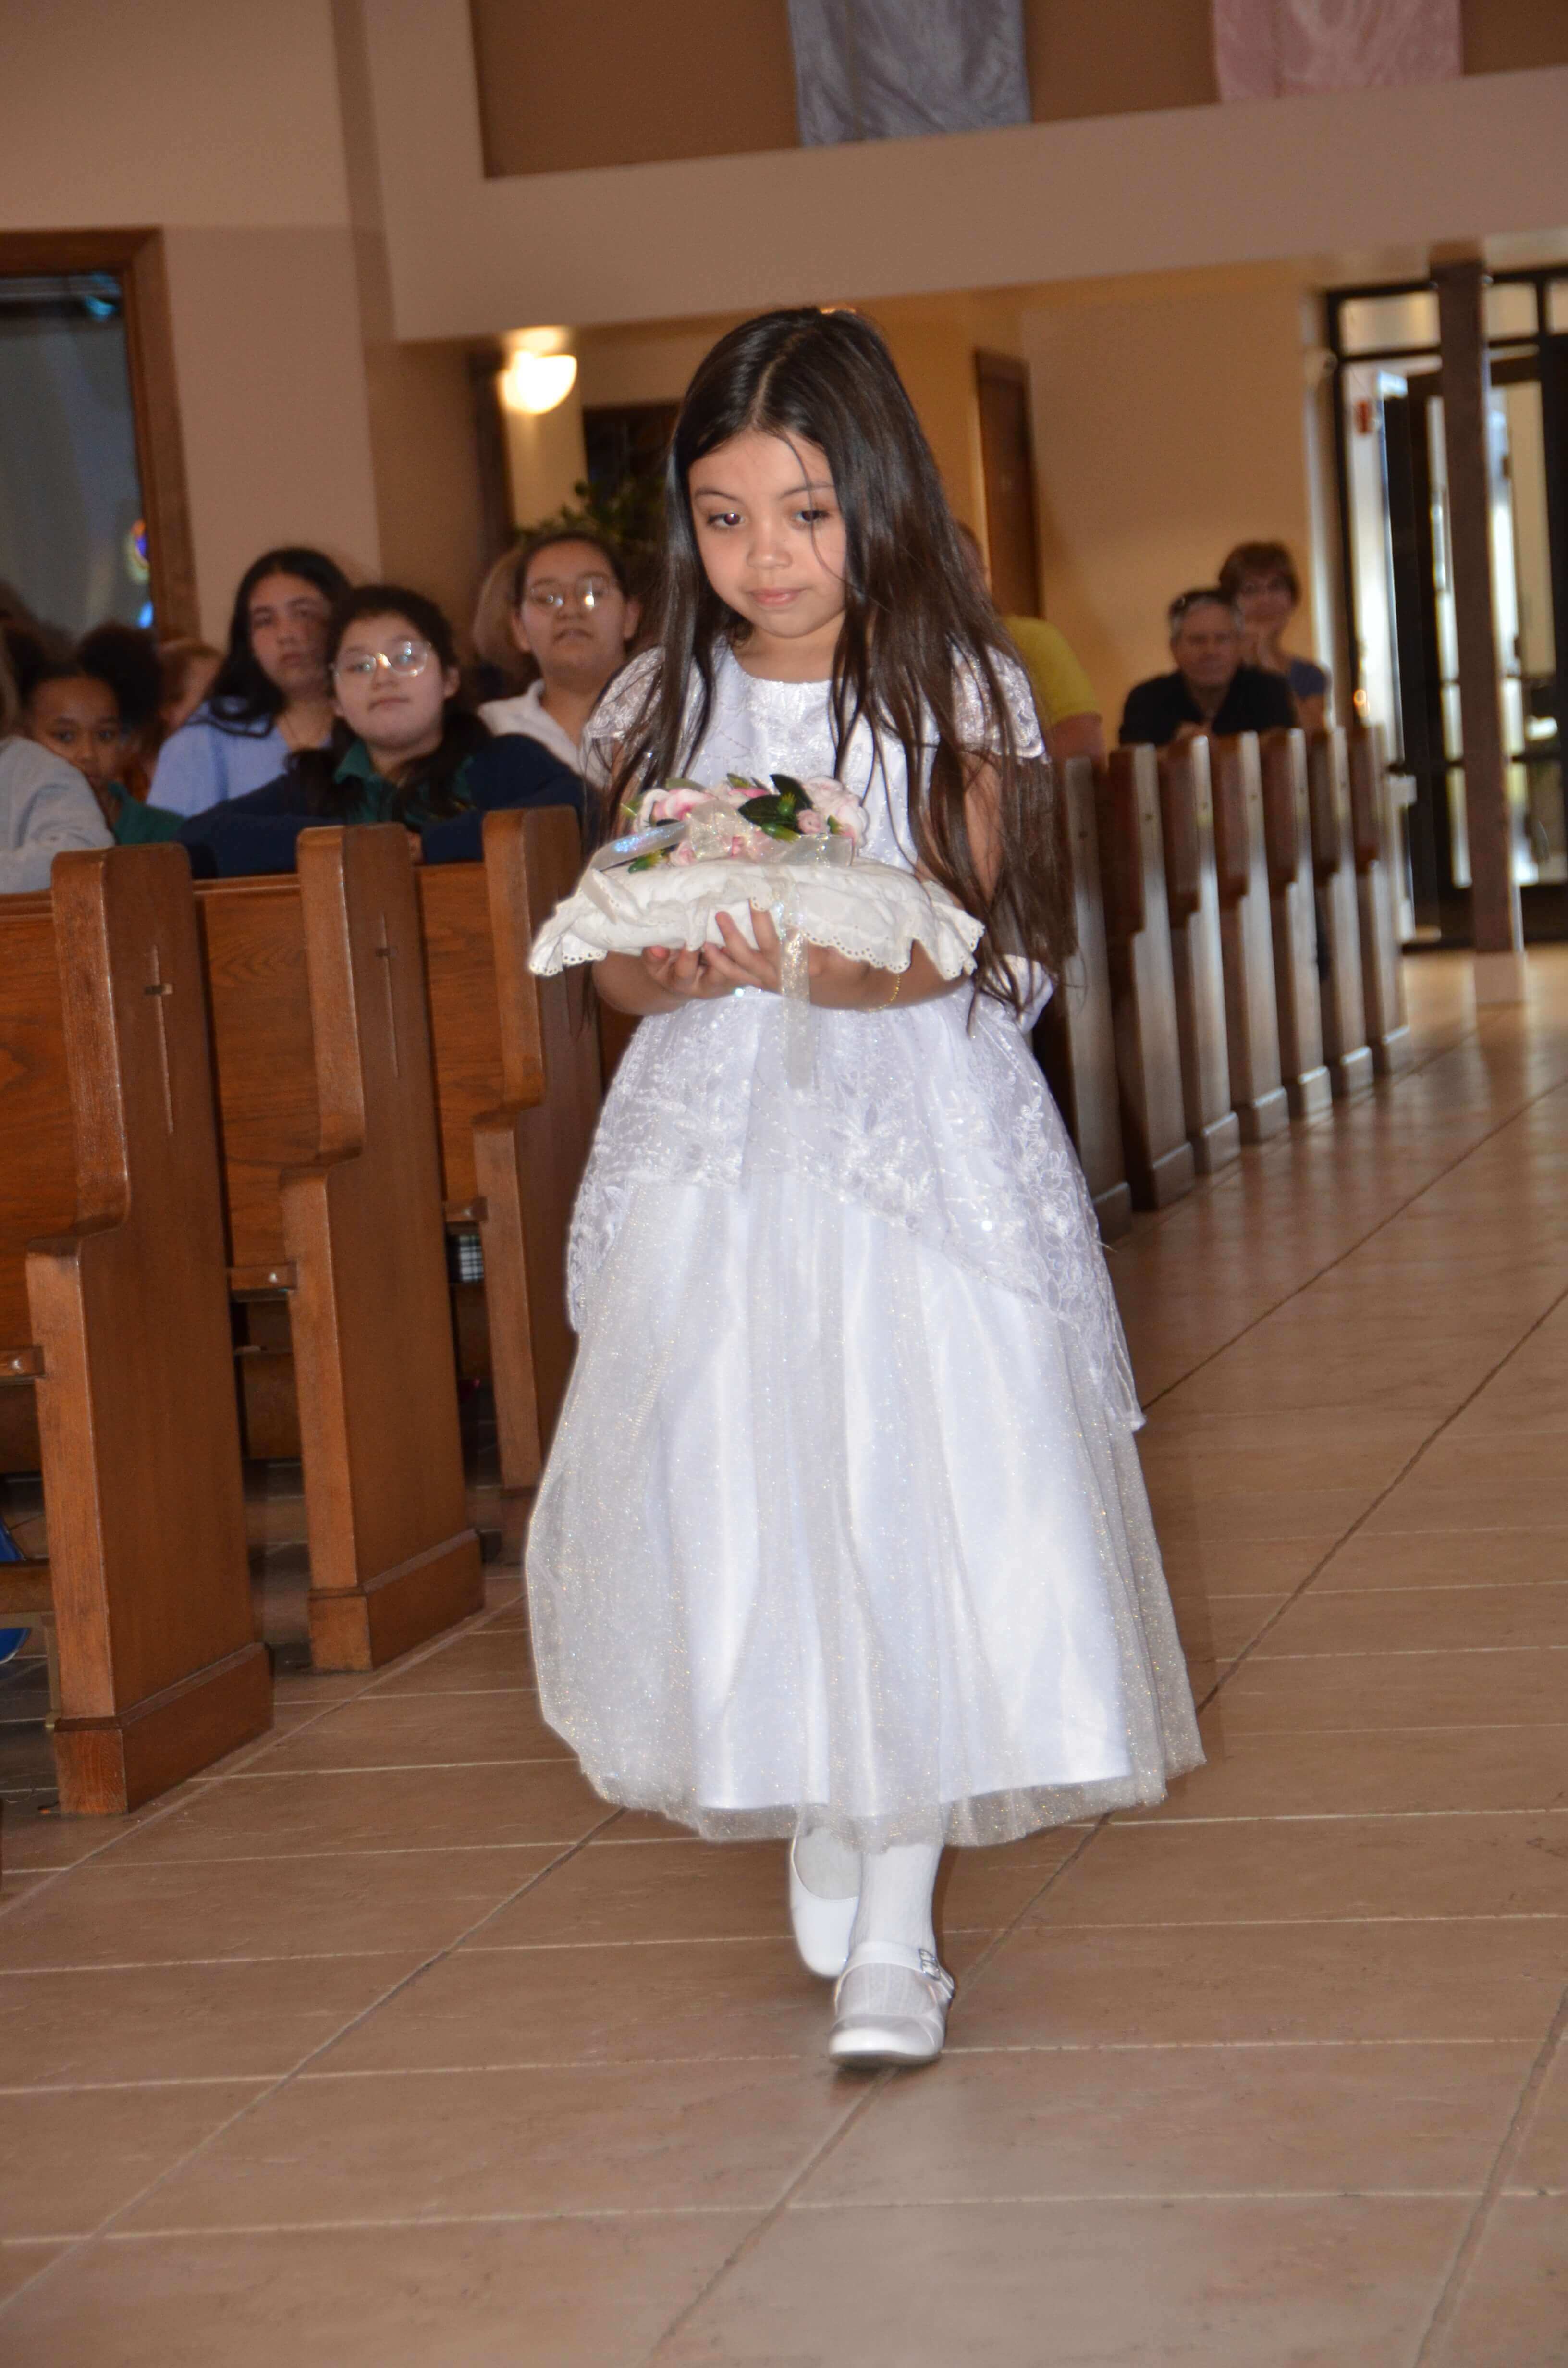 Child Carrying Flowers in Church